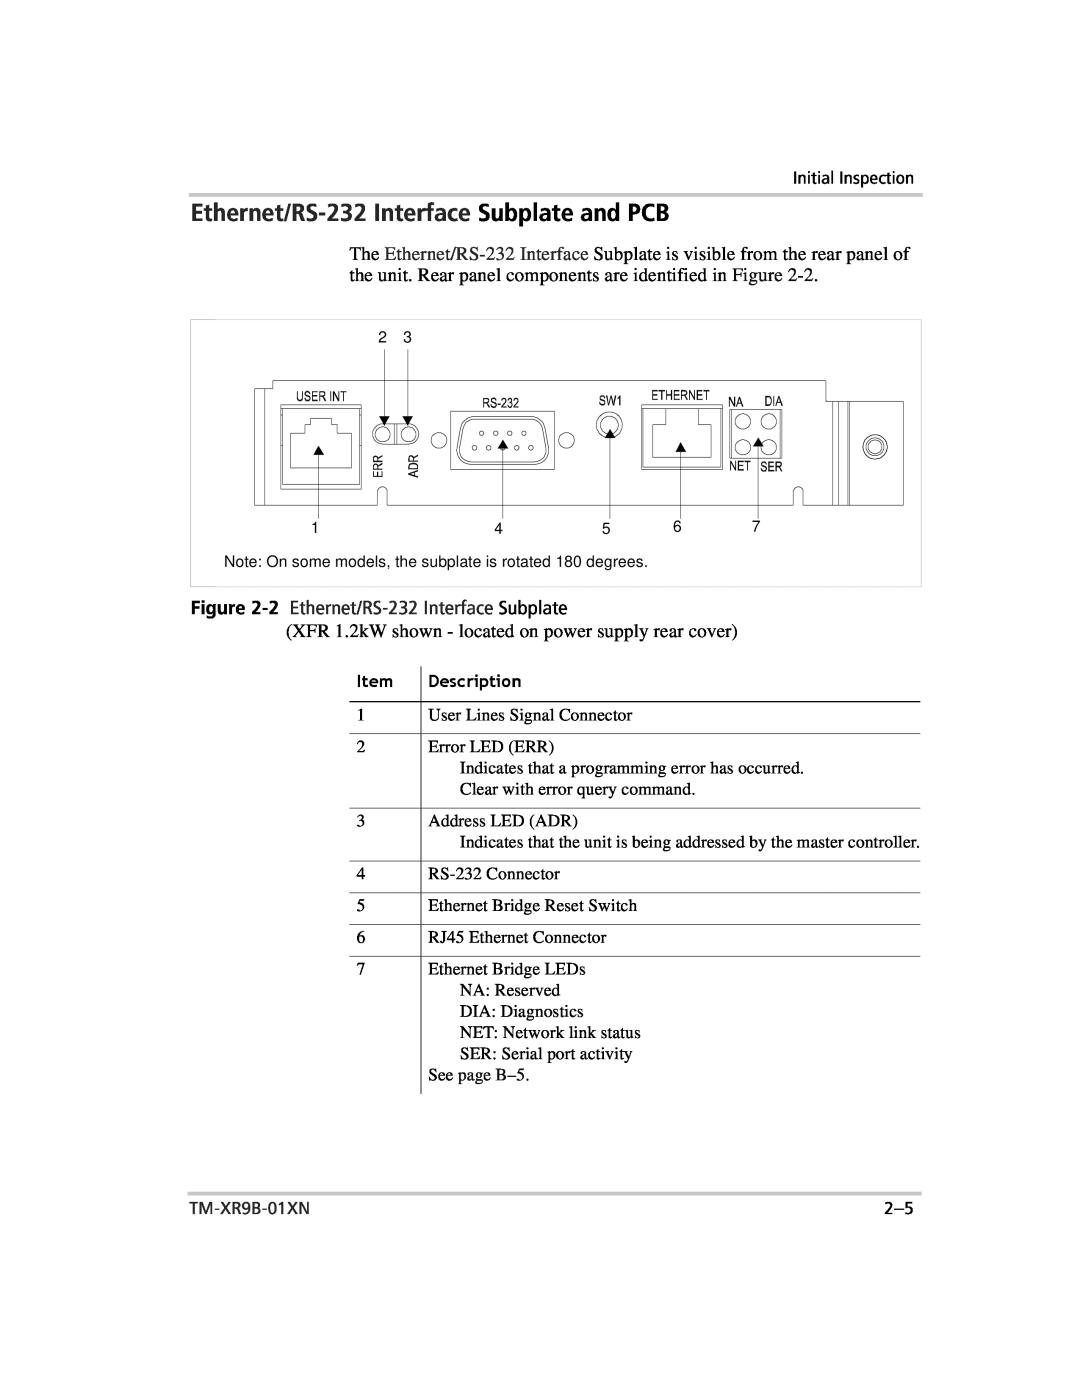 Xantrex Technology ENET-XFR manual 1Item, Ethernet/RS-232 Interface Subplate and PCB, 2 Ethernet/RS-232 Interface Subplate 